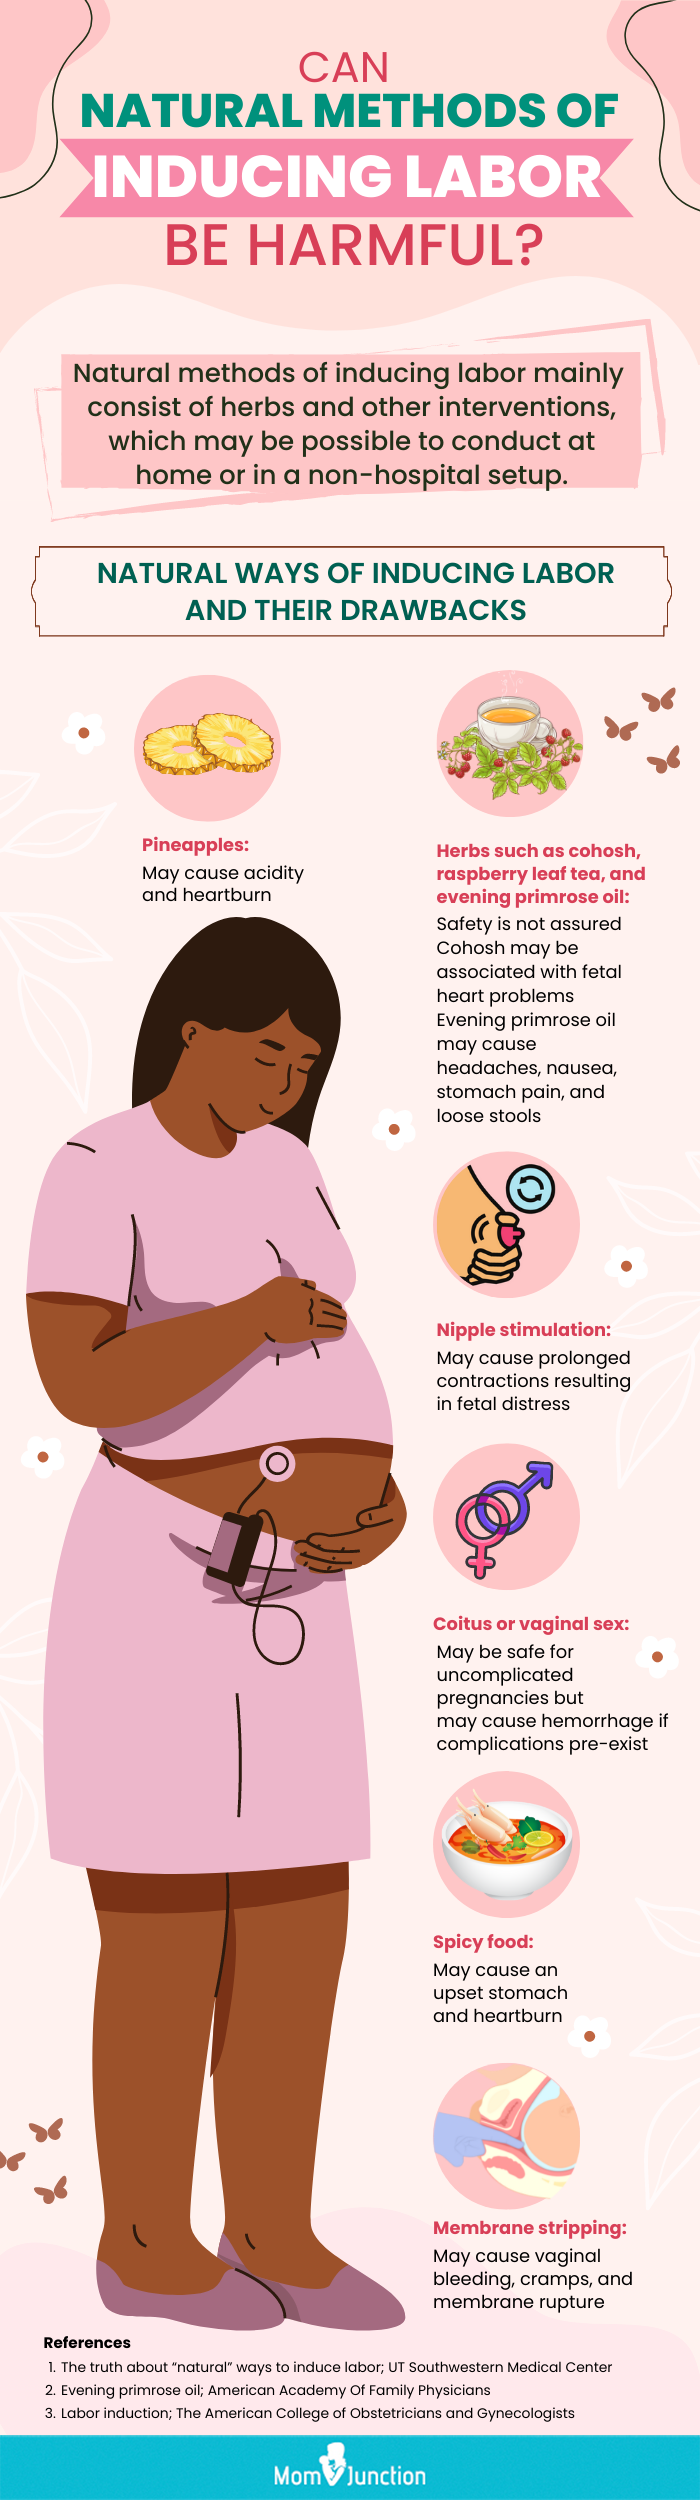 can natural methods of inducing labor be harmful (infographic)